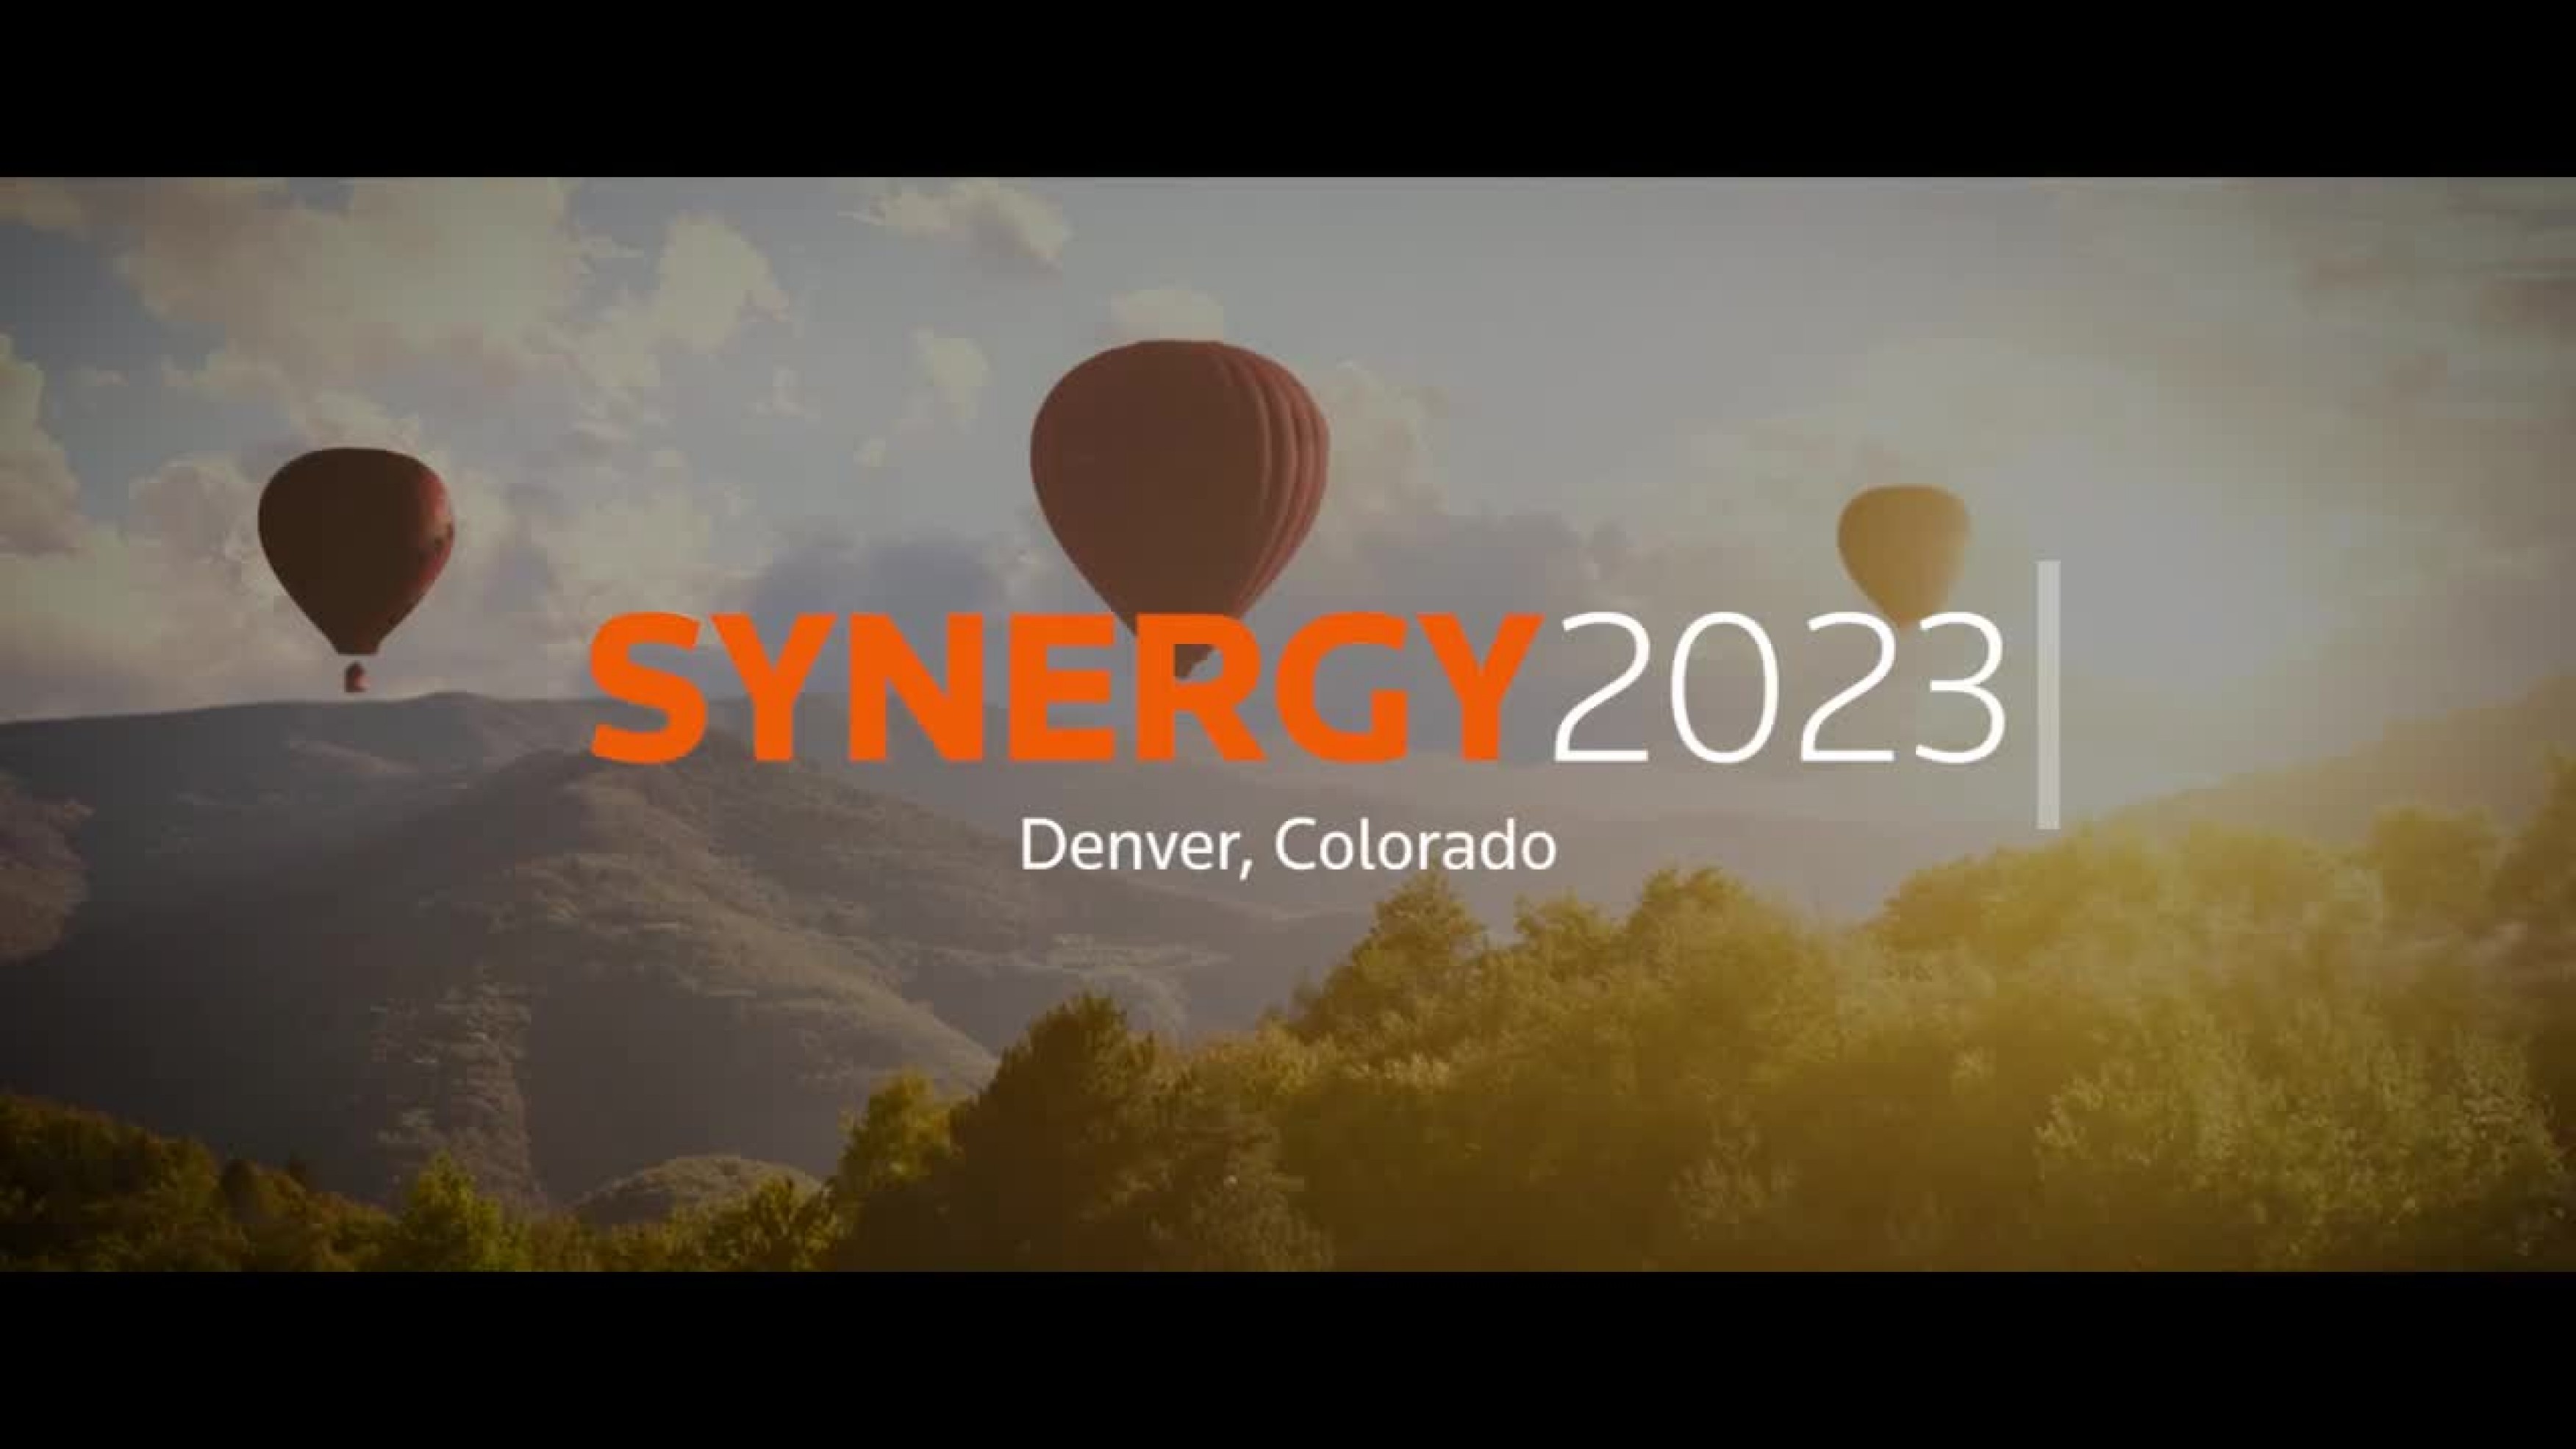 SYNERGY2023 Conference for Corporate Legal, Tax and Trade Professionals